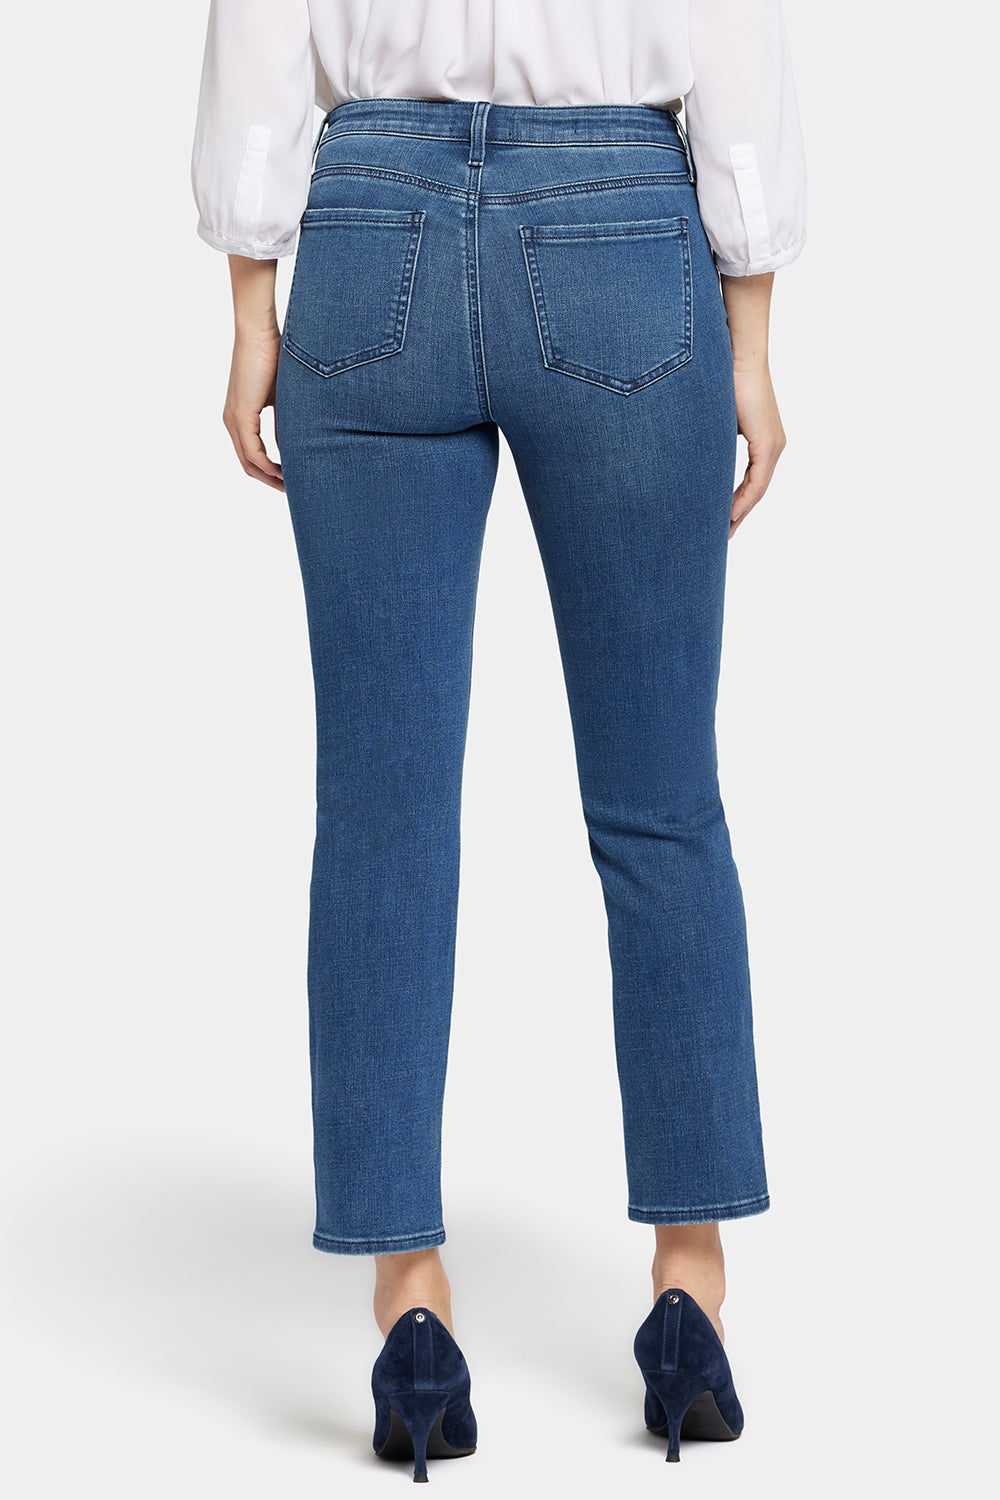 NYDJ Sheri Slim Ankle Jeans In Petite With Riveted Side Slits - Bluewell